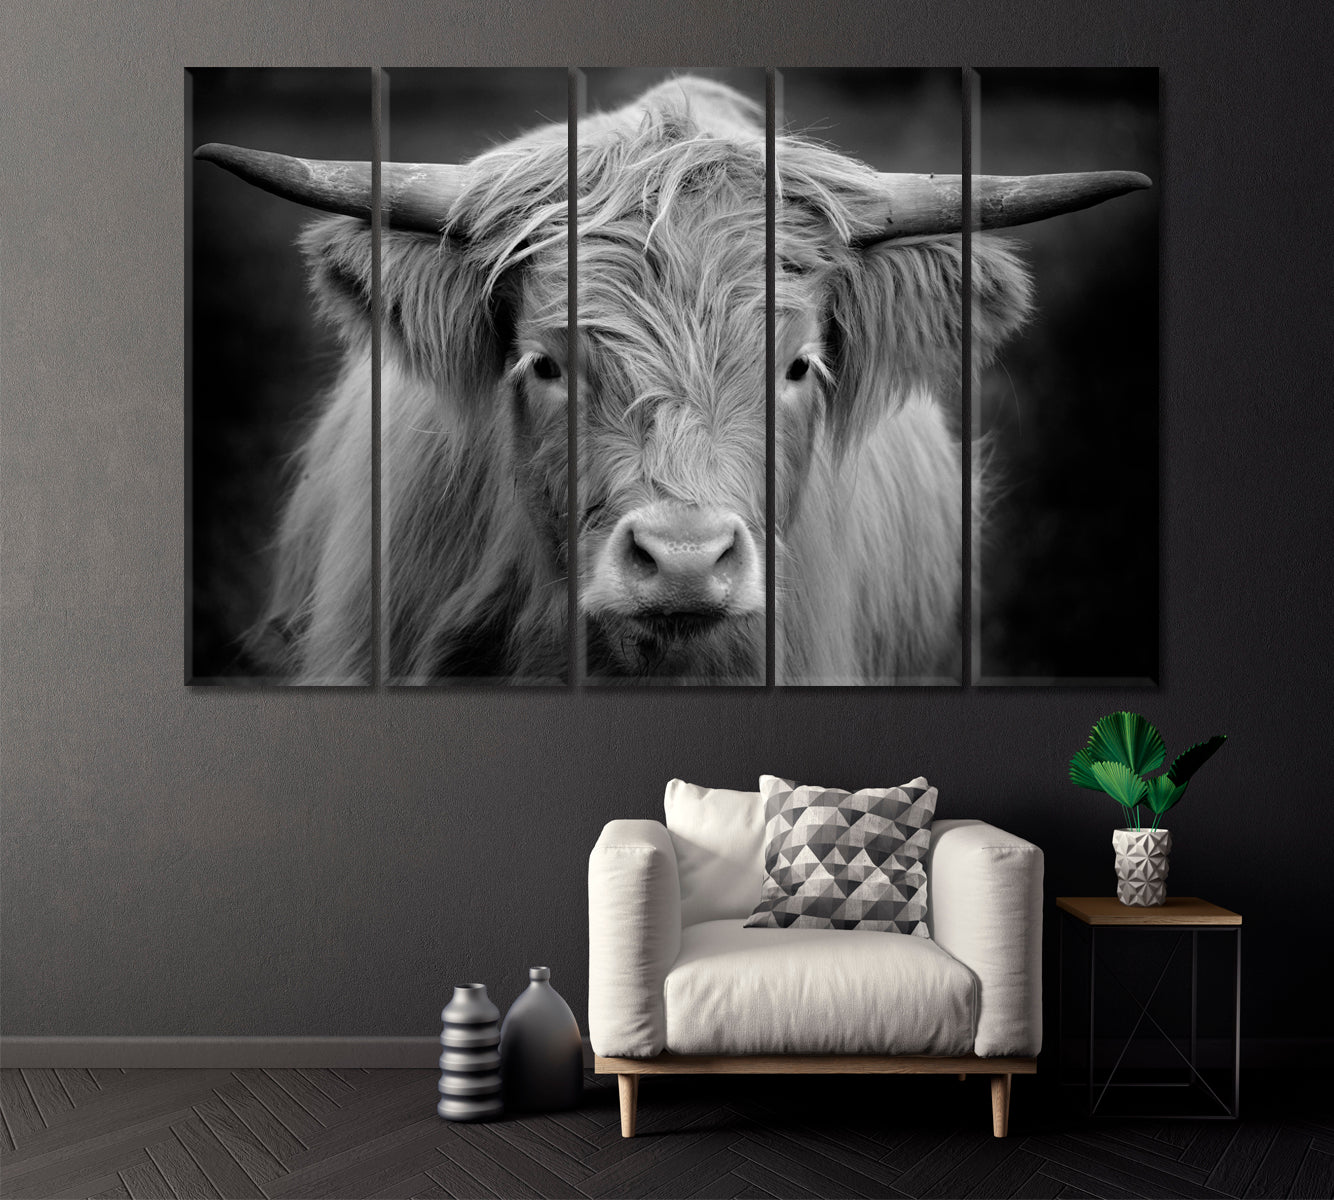 Highland Cow in Black and White Canvas Print ArtLexy 5 Panels 36"x24" inches 